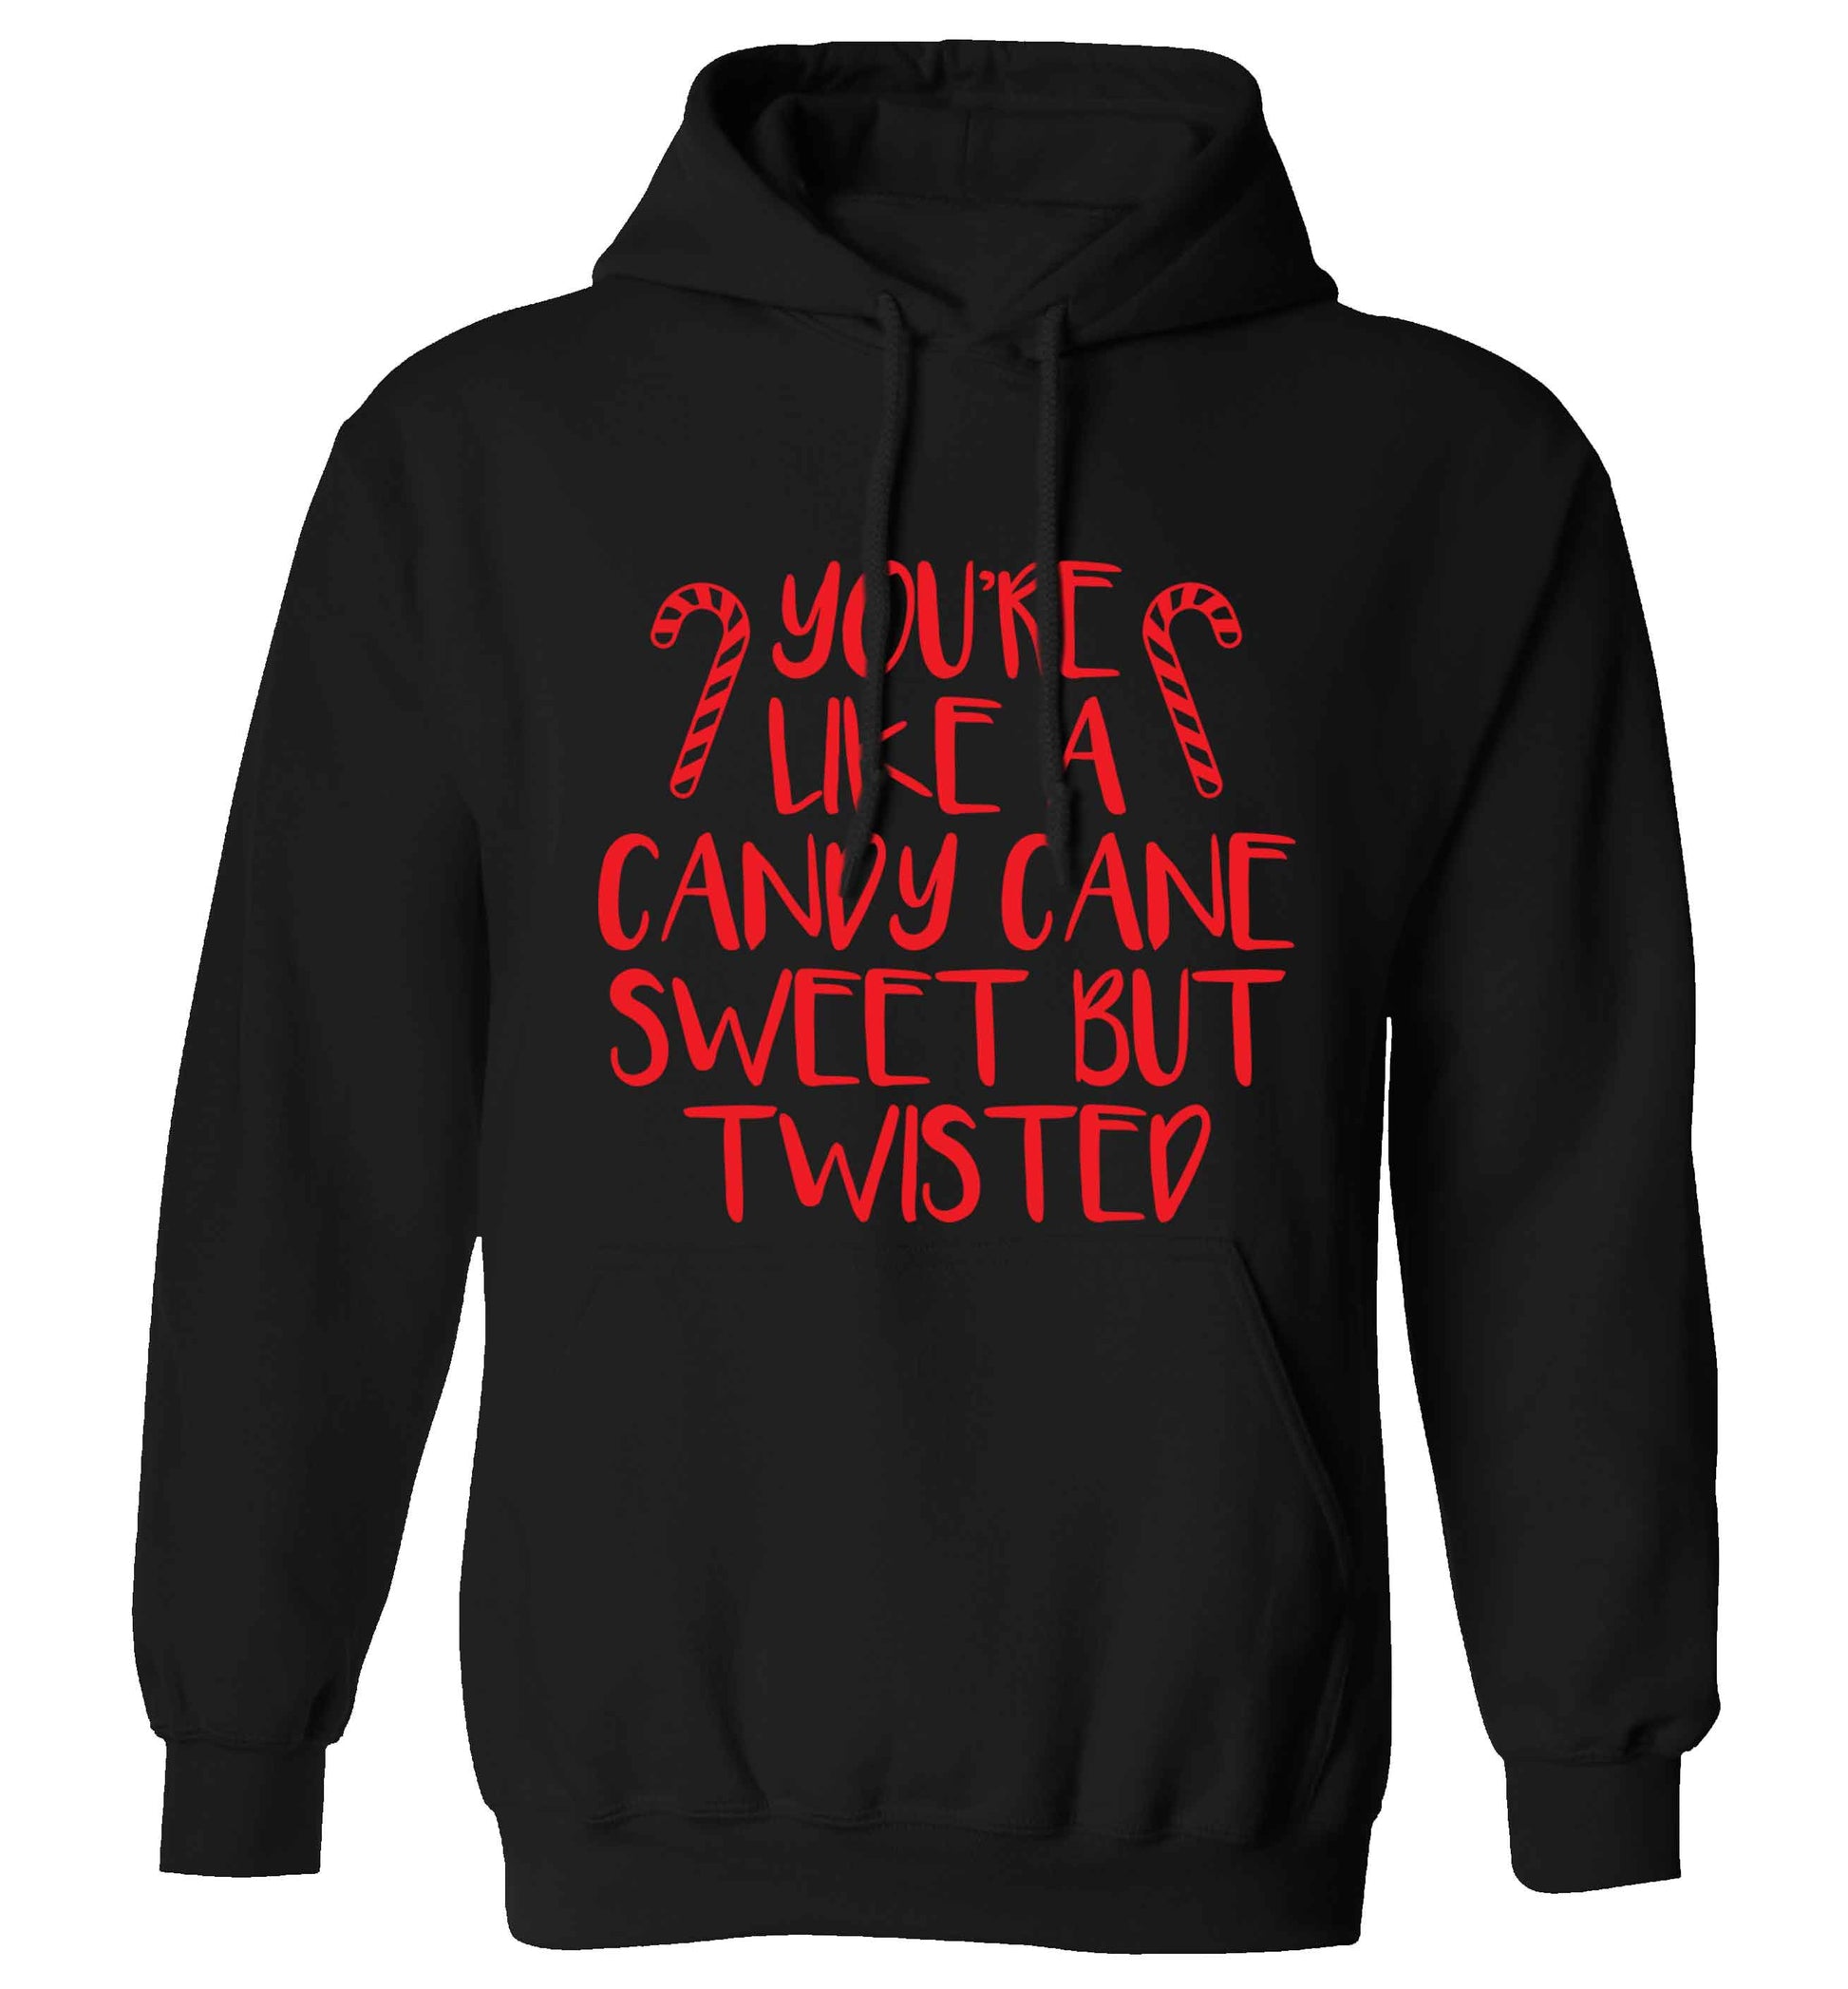 You're like a candy cane sweet but twisted adults unisex black hoodie 2XL